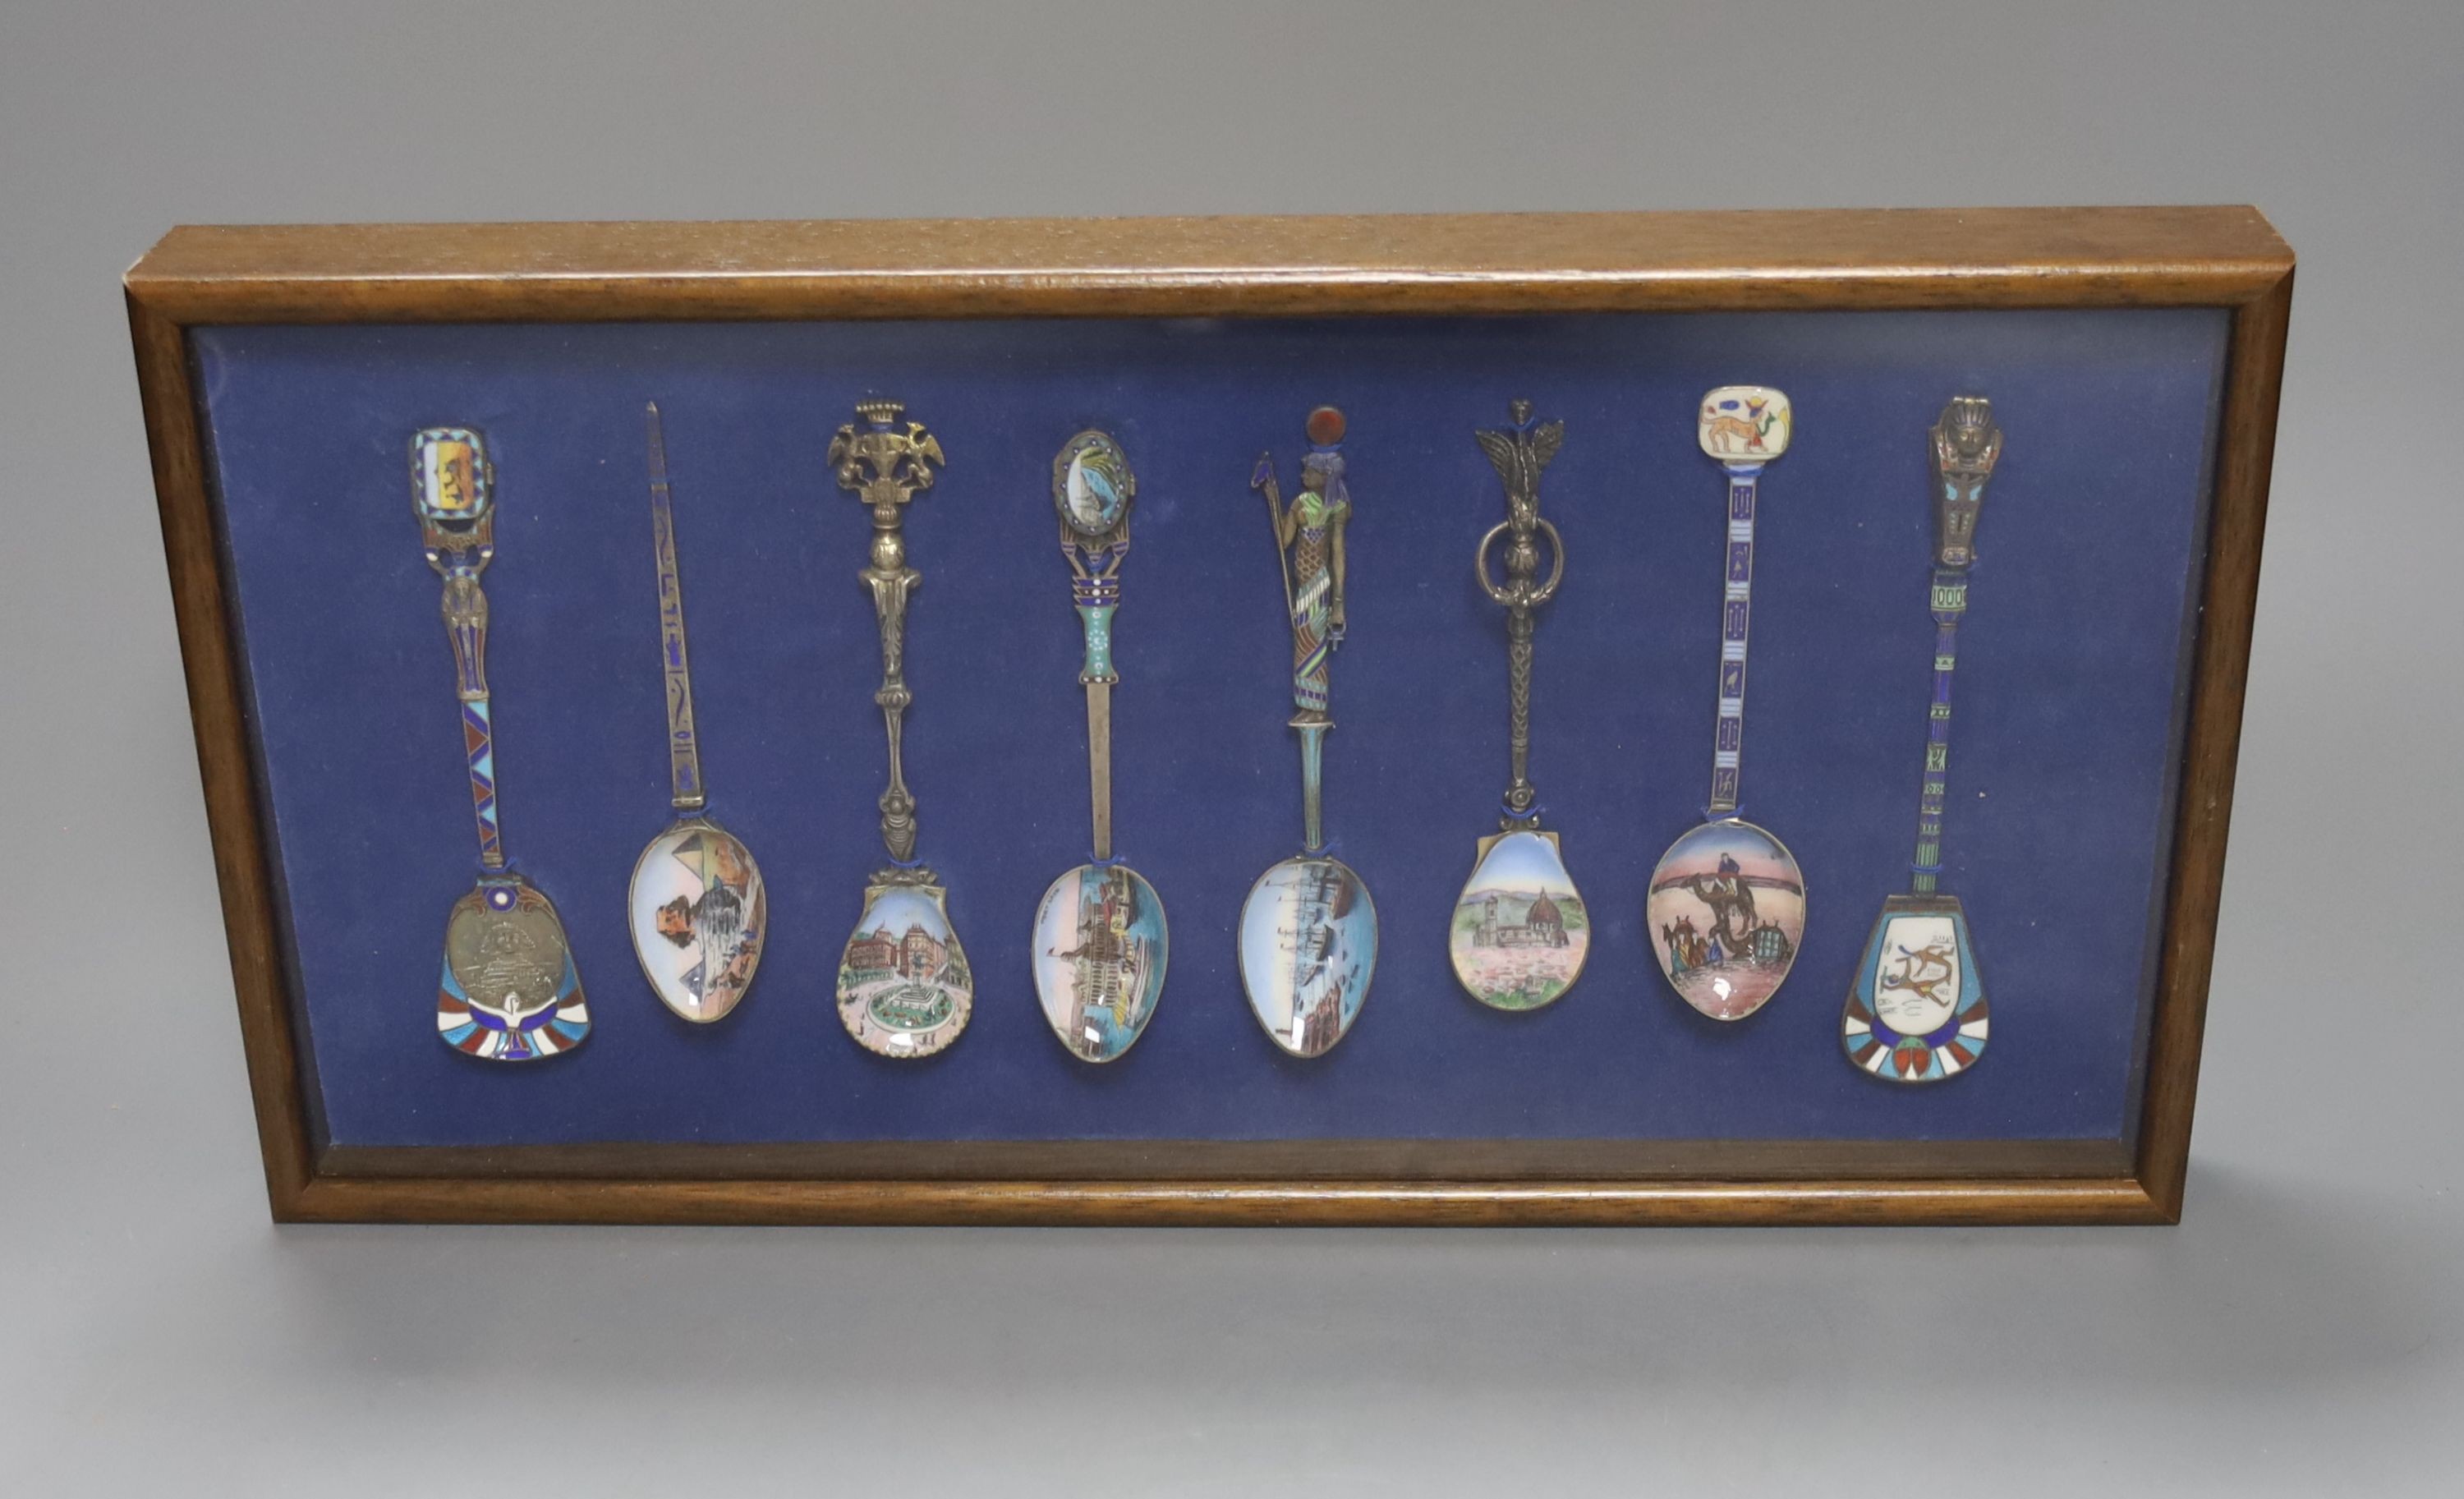 Eight Continental 800 standard silver and enamel ‘Egypt’ souvenir spoons, early 20th century, one with hinged sarcophagus terminal opening to reveal a small figure of a mummy, in a display case